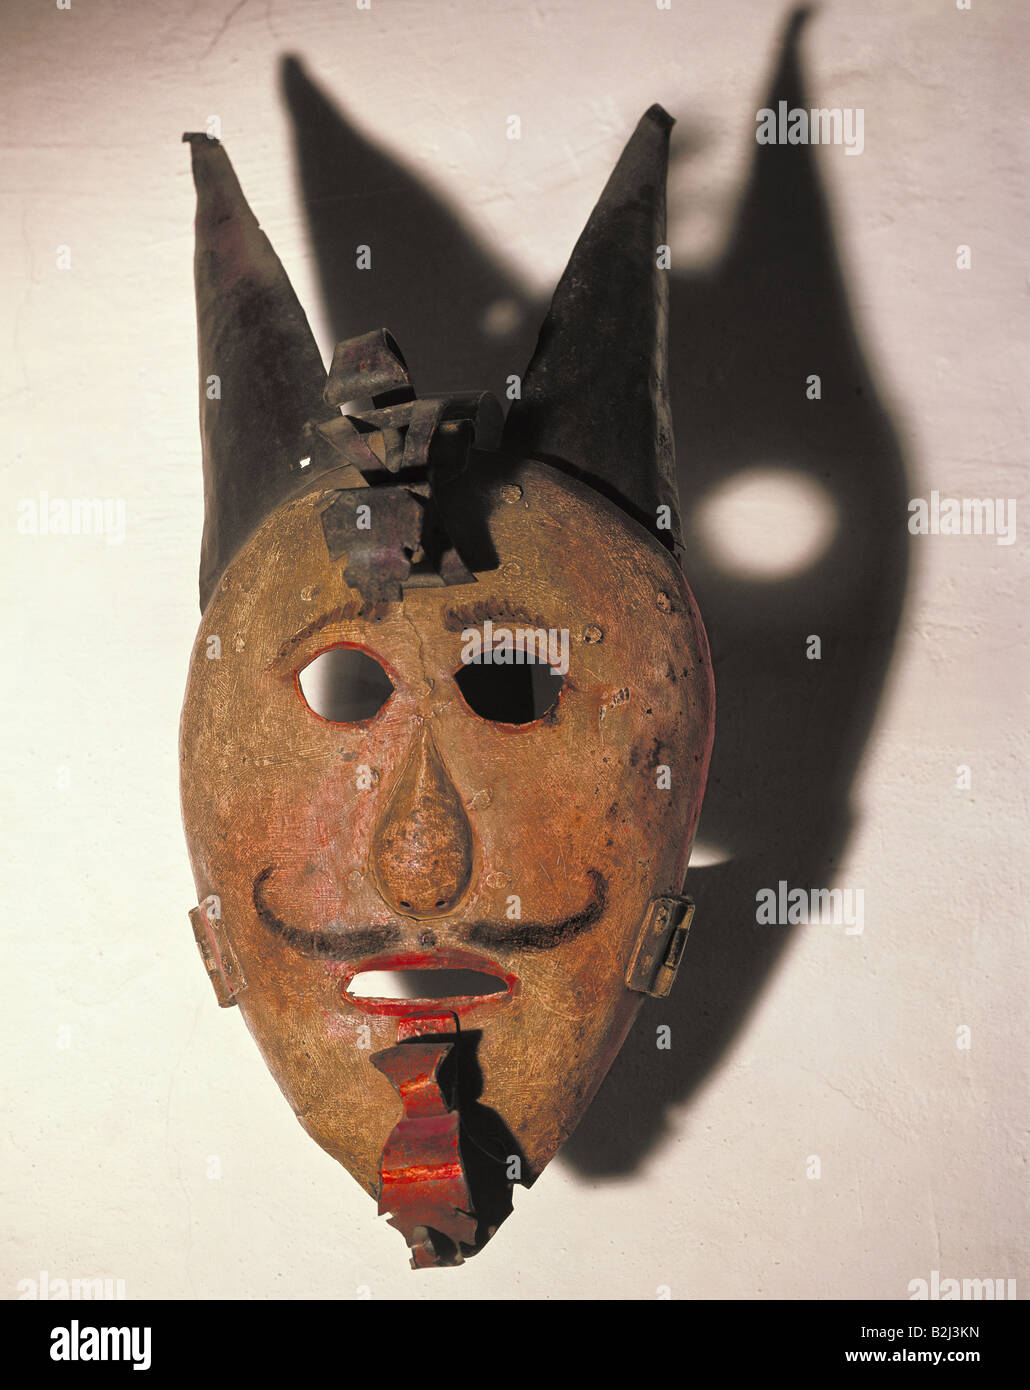 justice, penitentiary system, pillory, shame mask, wrought iron, wood, height 35 cm, Wasserburg, Germany, 19th century, Wasserburg museum of local history, historic, historical, history of law, masks, punishment, Stock Photo